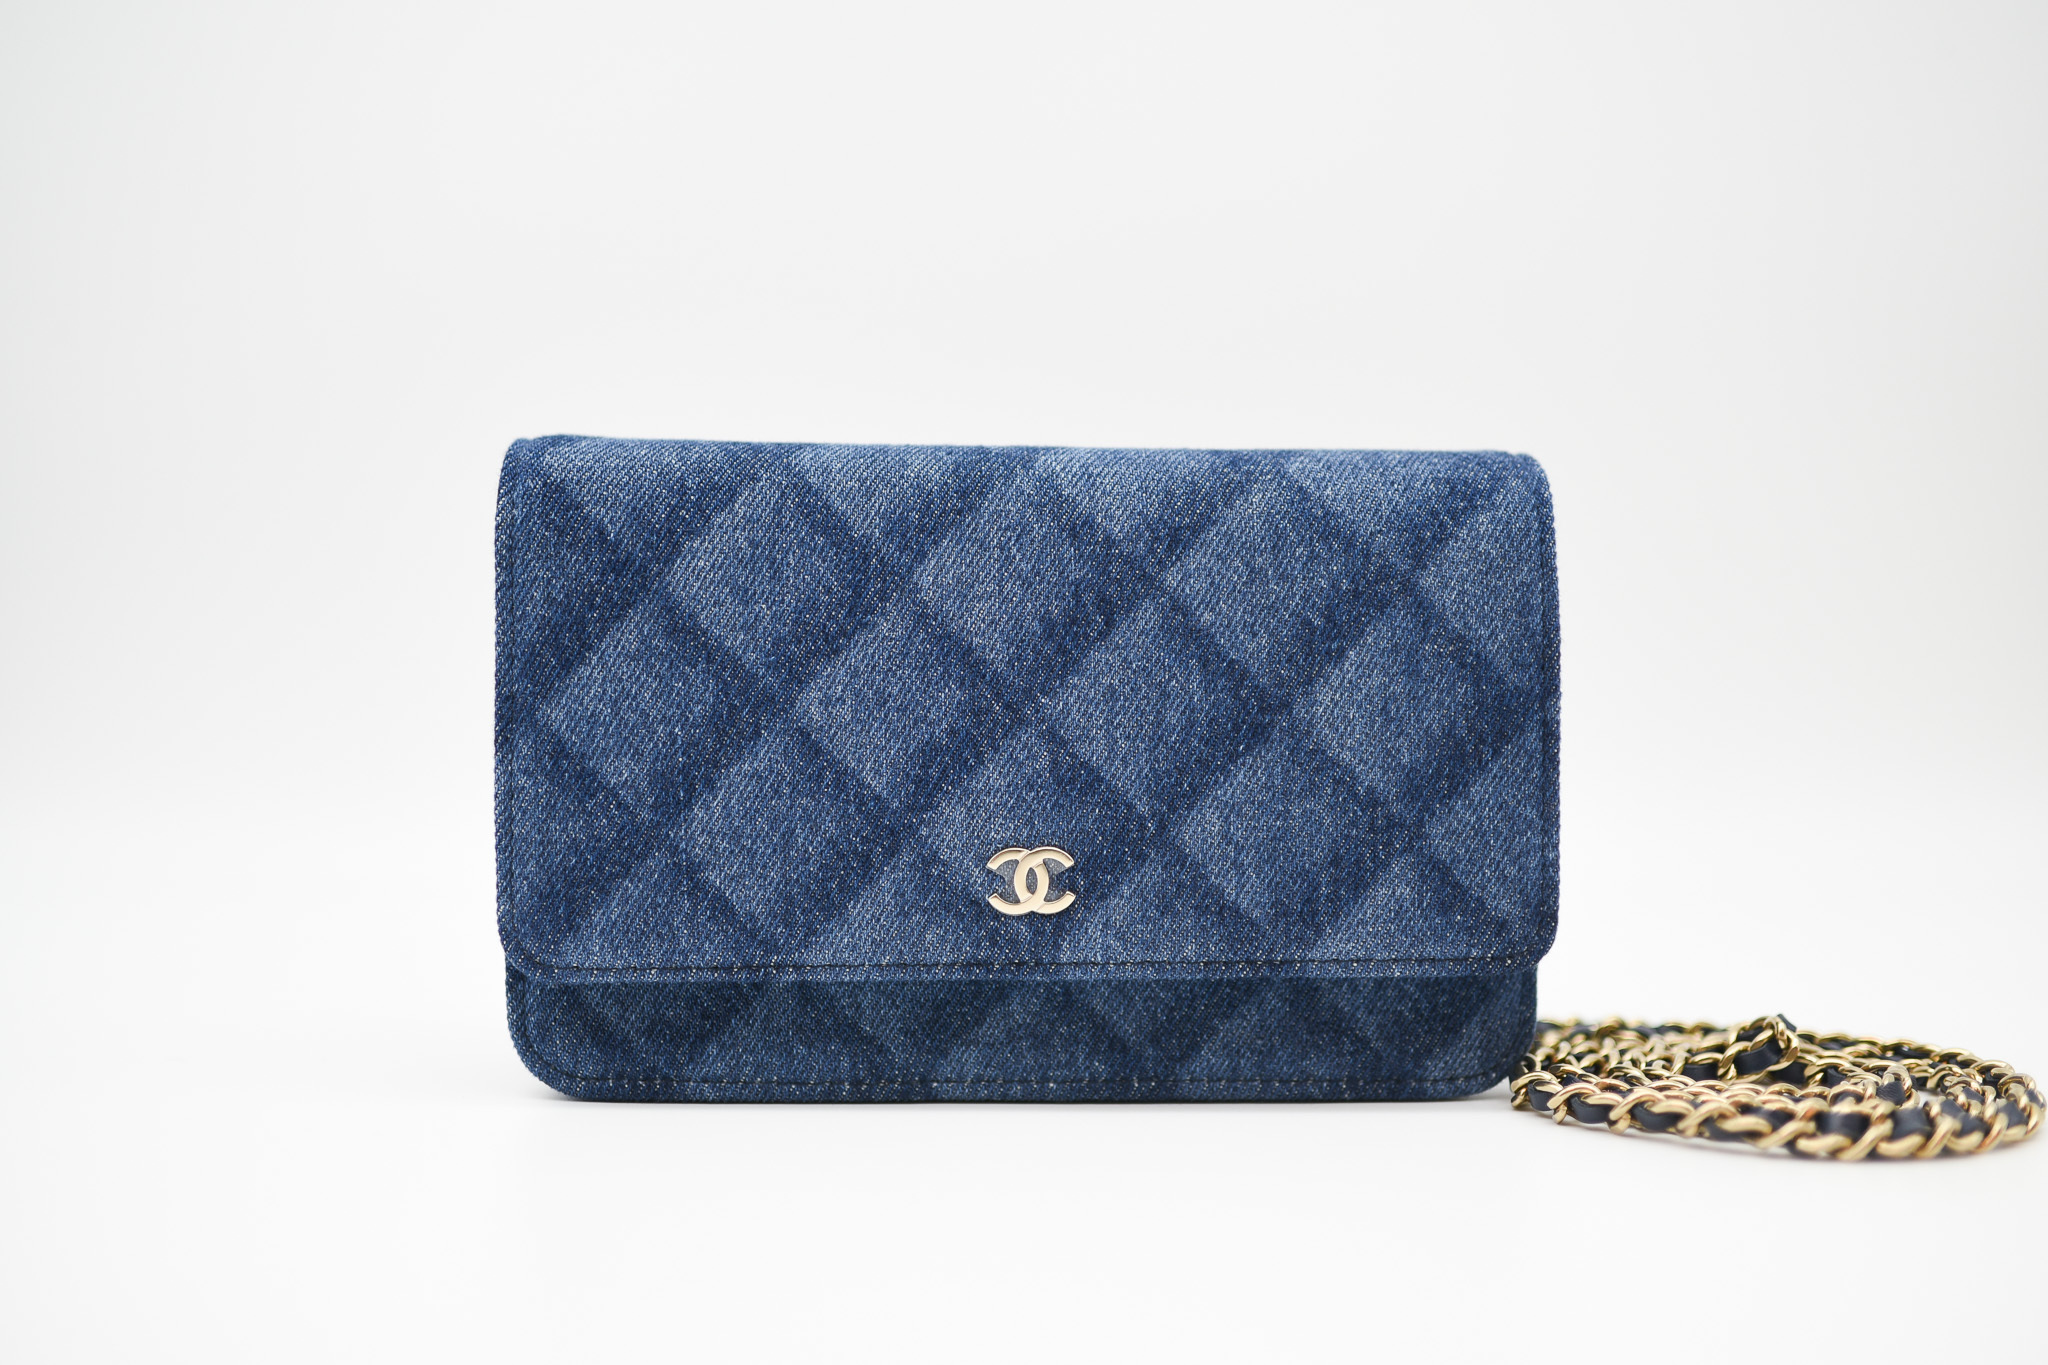 Chanel SLG 18K Round Coin Purse, Blue Caviar Leather, Light Gold Hardware,  As New in Box - Julia Rose Boston